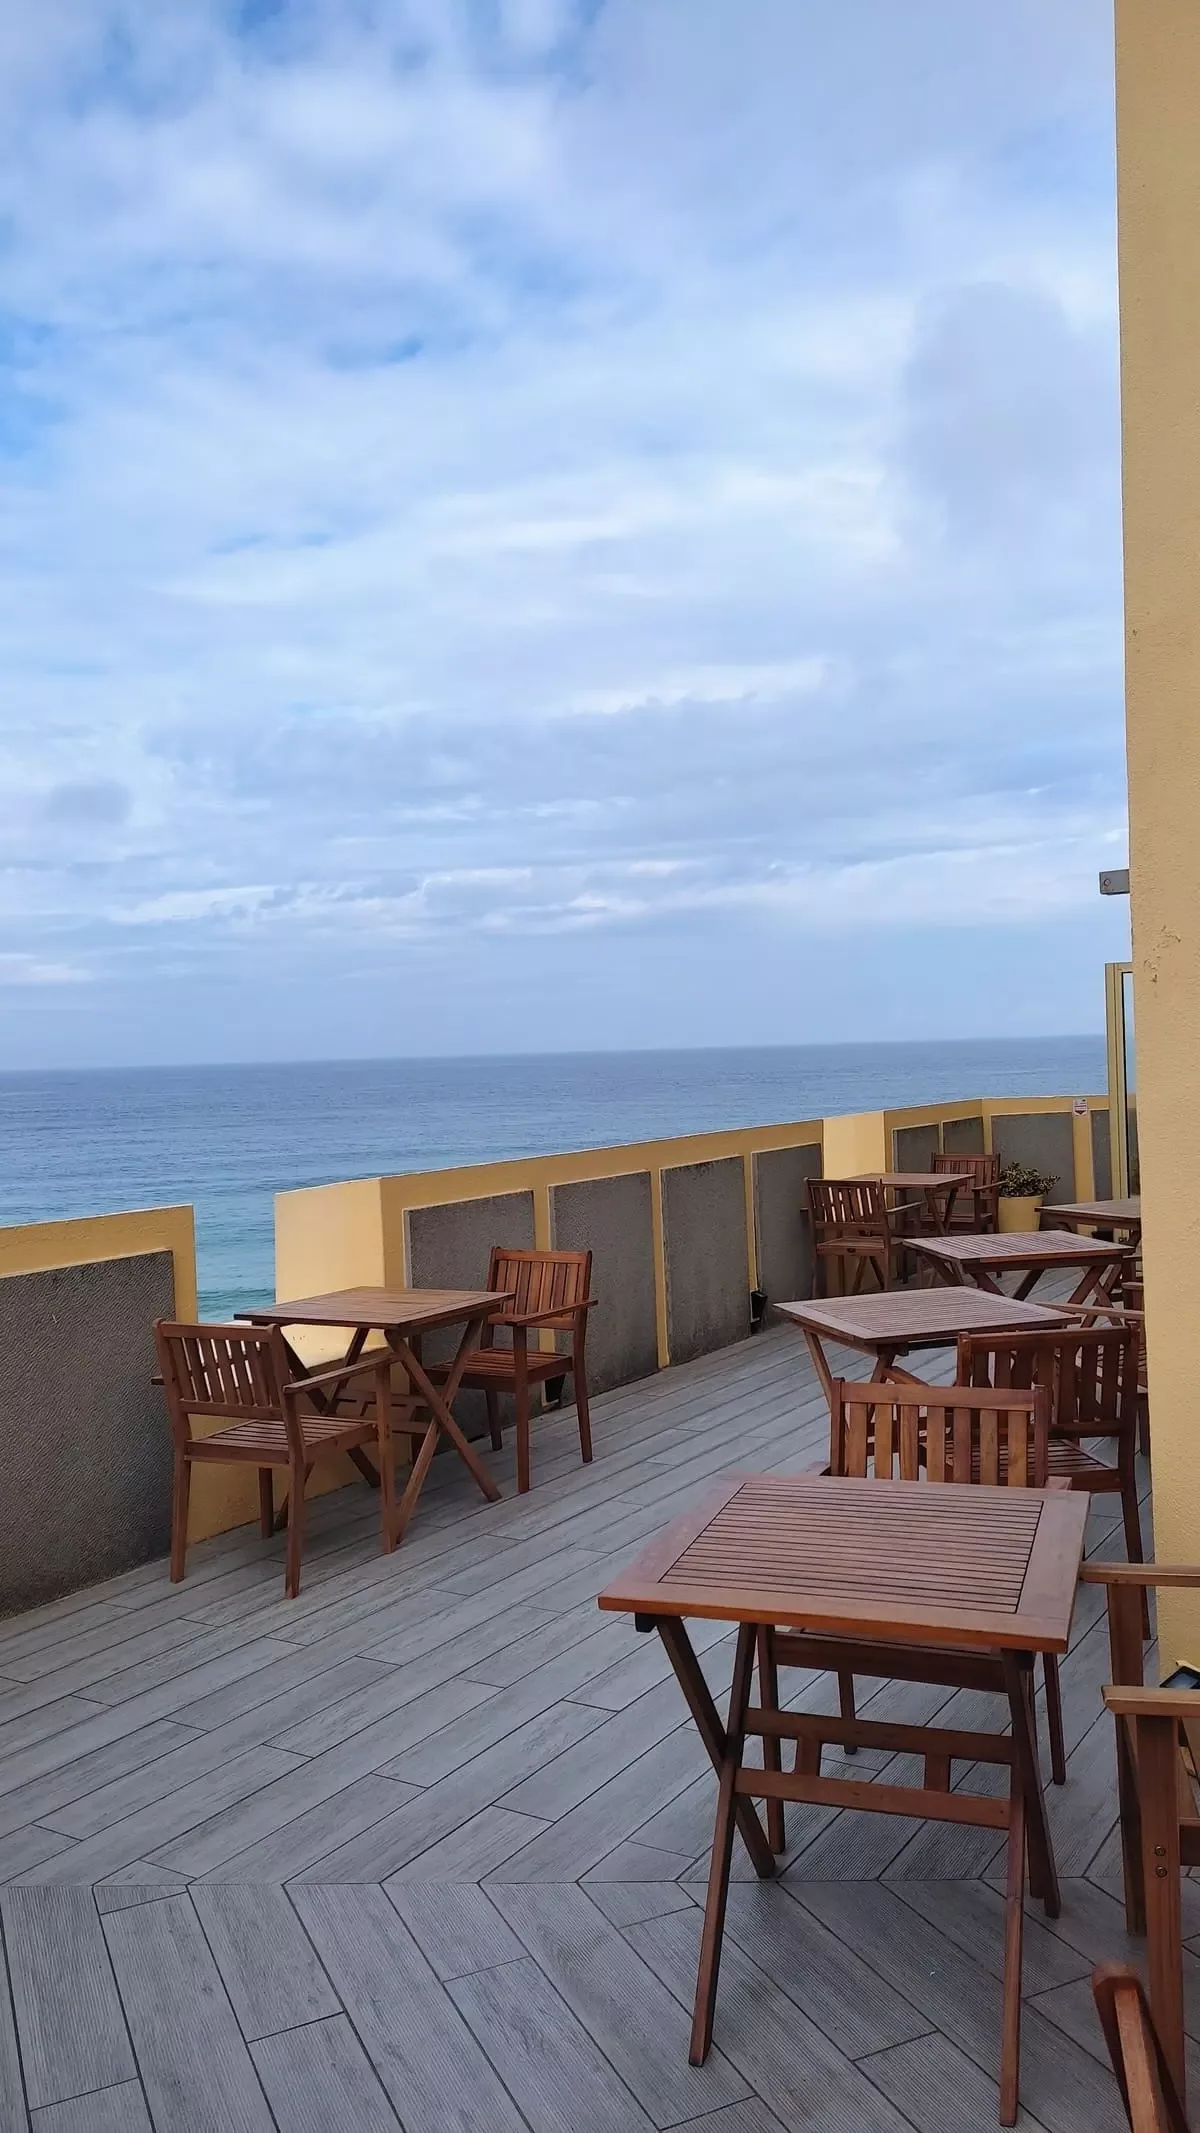 Terrace of hotel Fortaleza do Guinco with view over sea